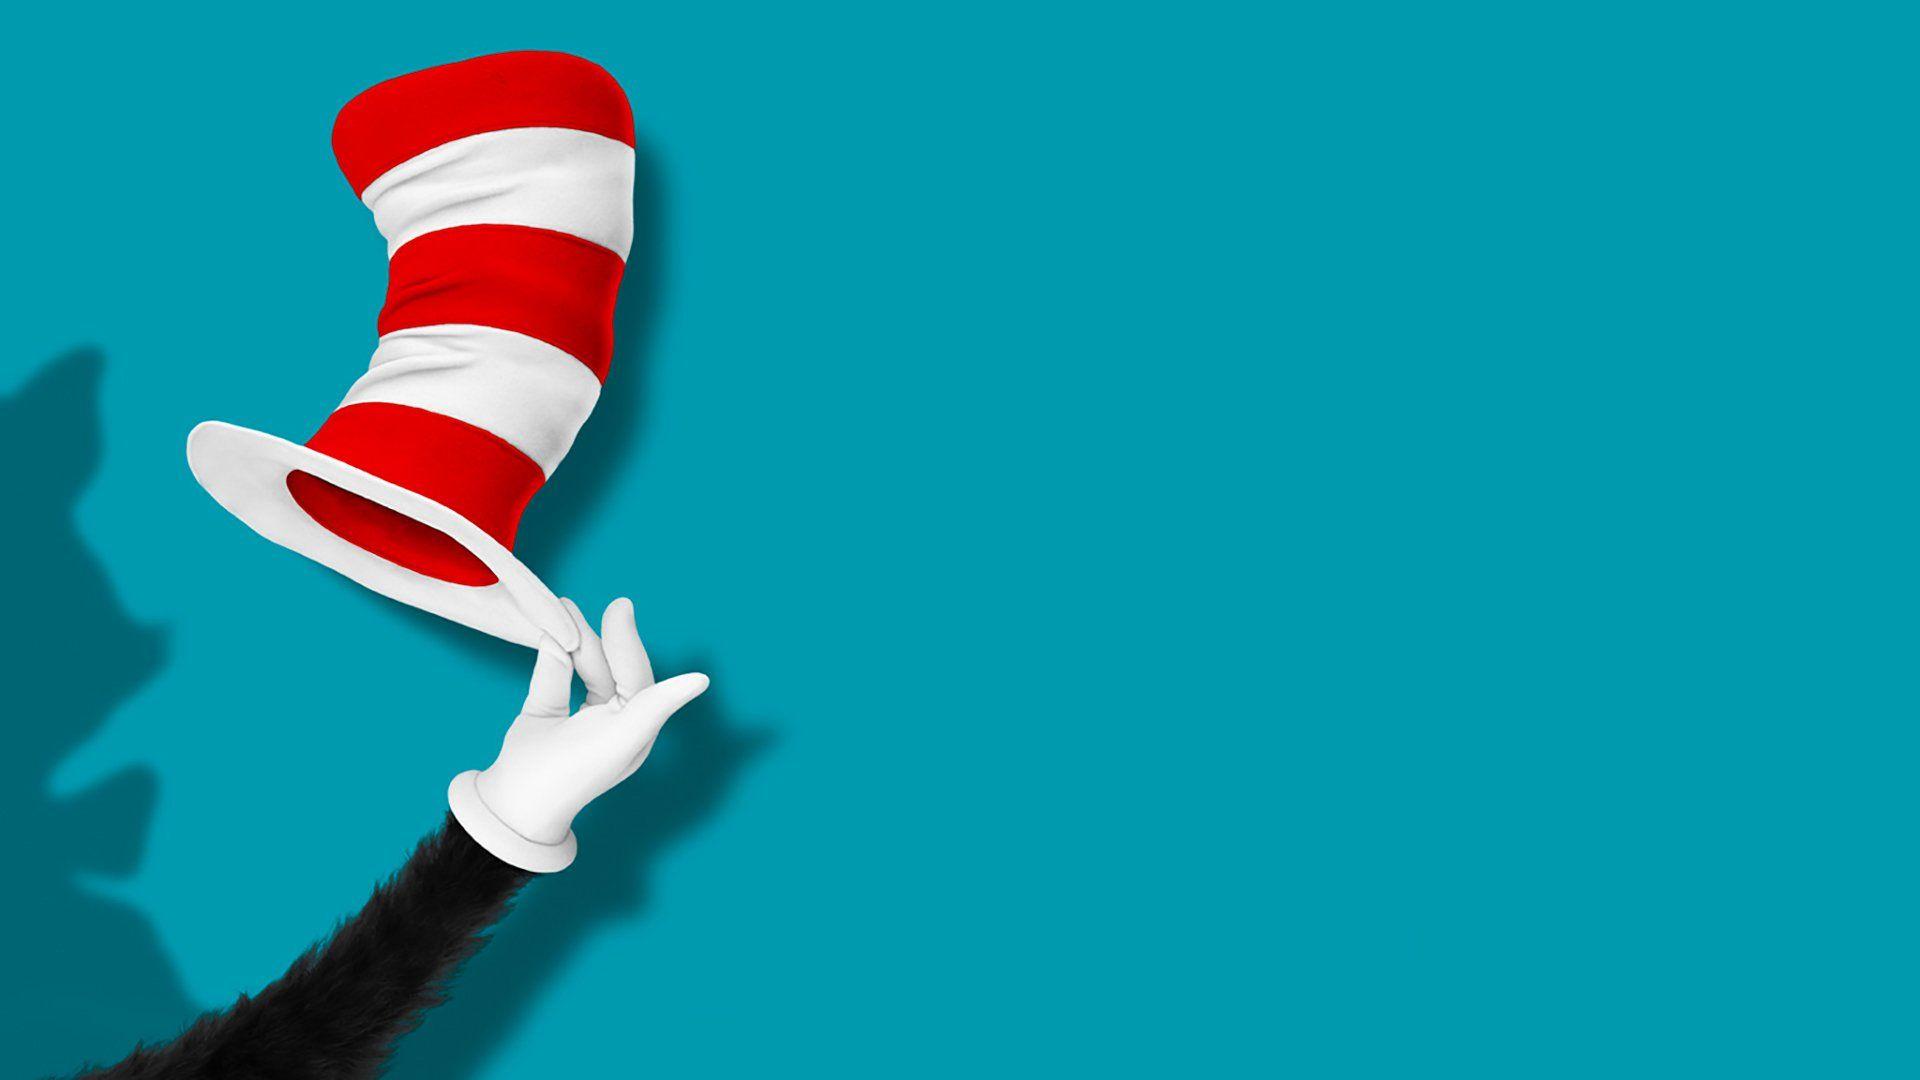 The Cat In The Hat Teams Background 2